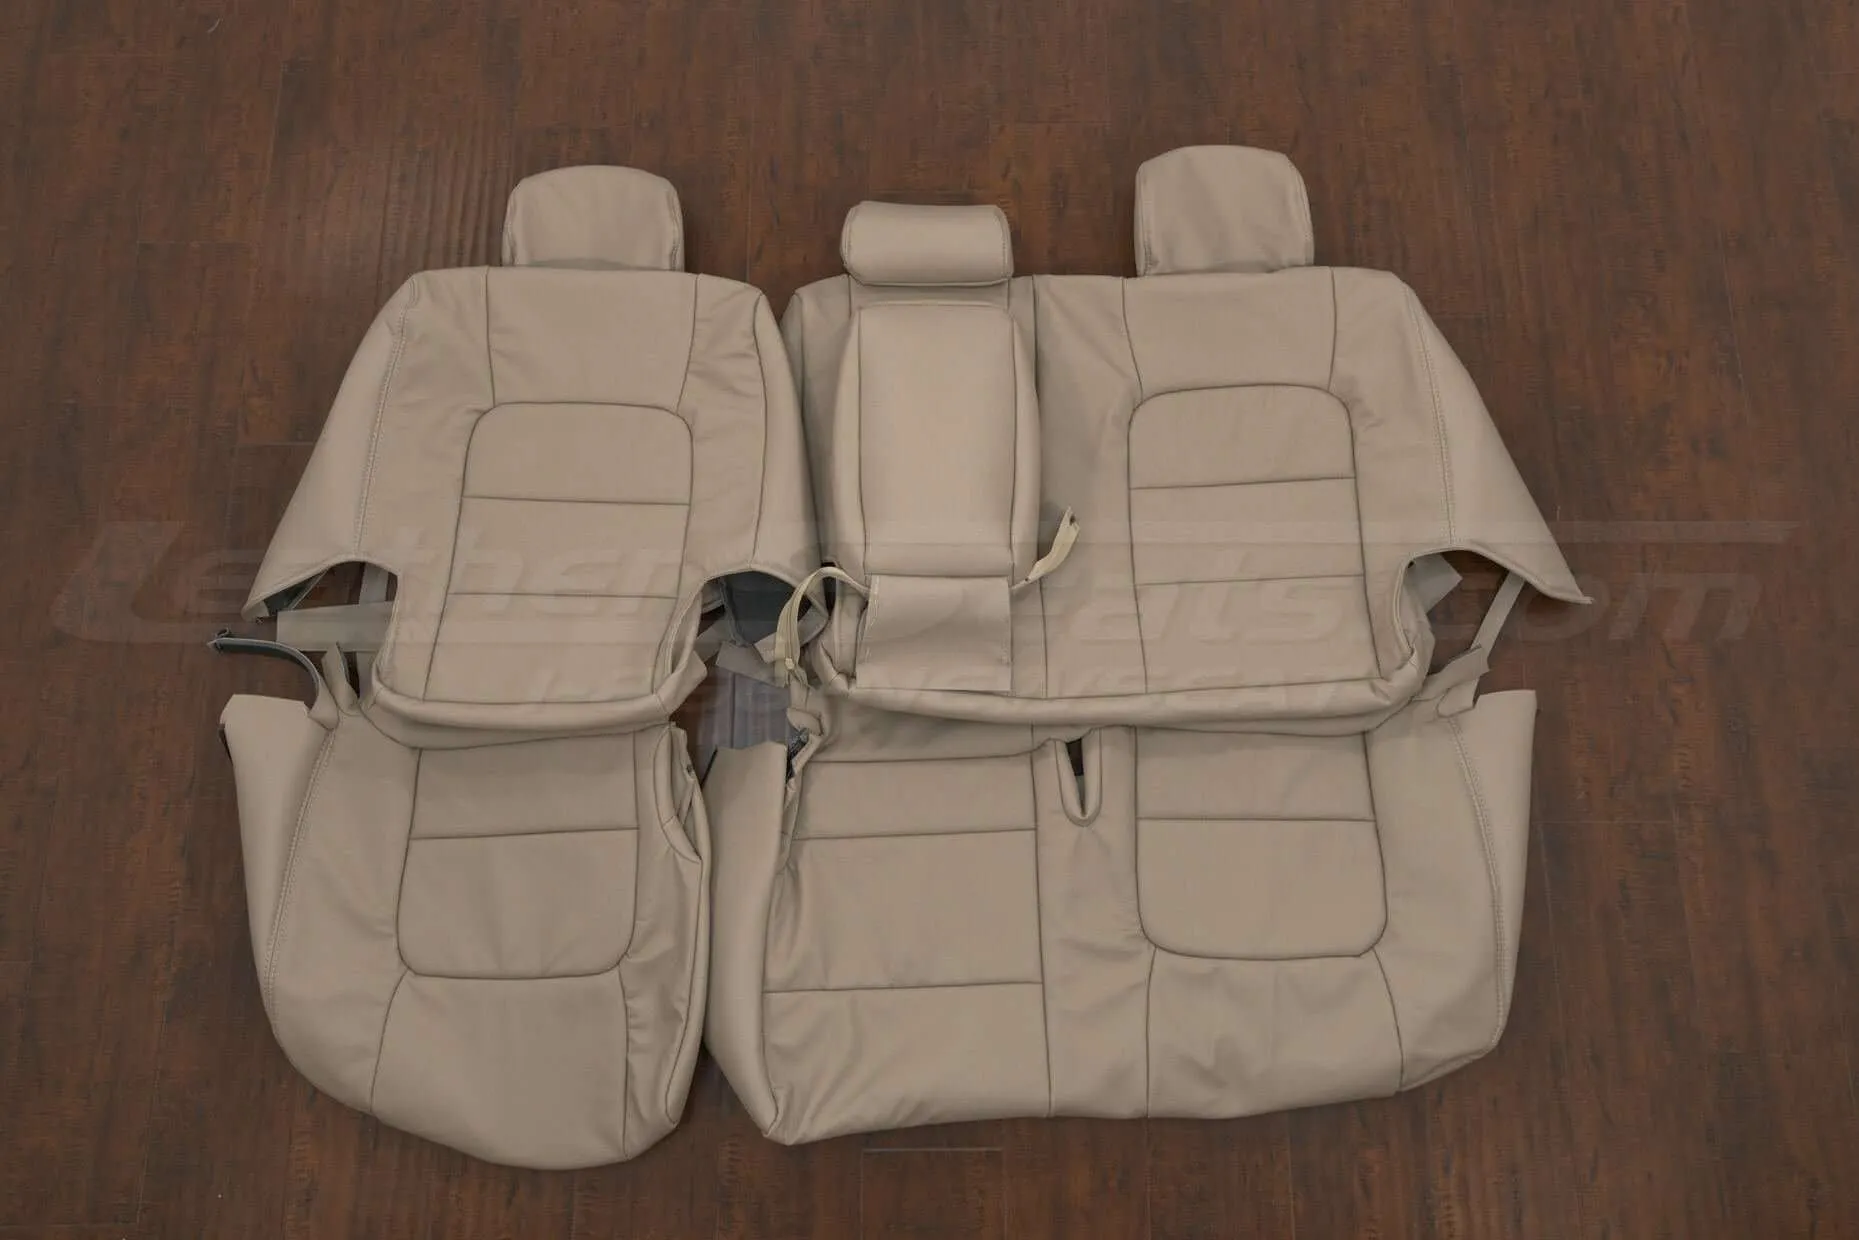 Parchment 098 leather upholstery kit for 2002 Lexus LX470 - Middle Row with Armrest